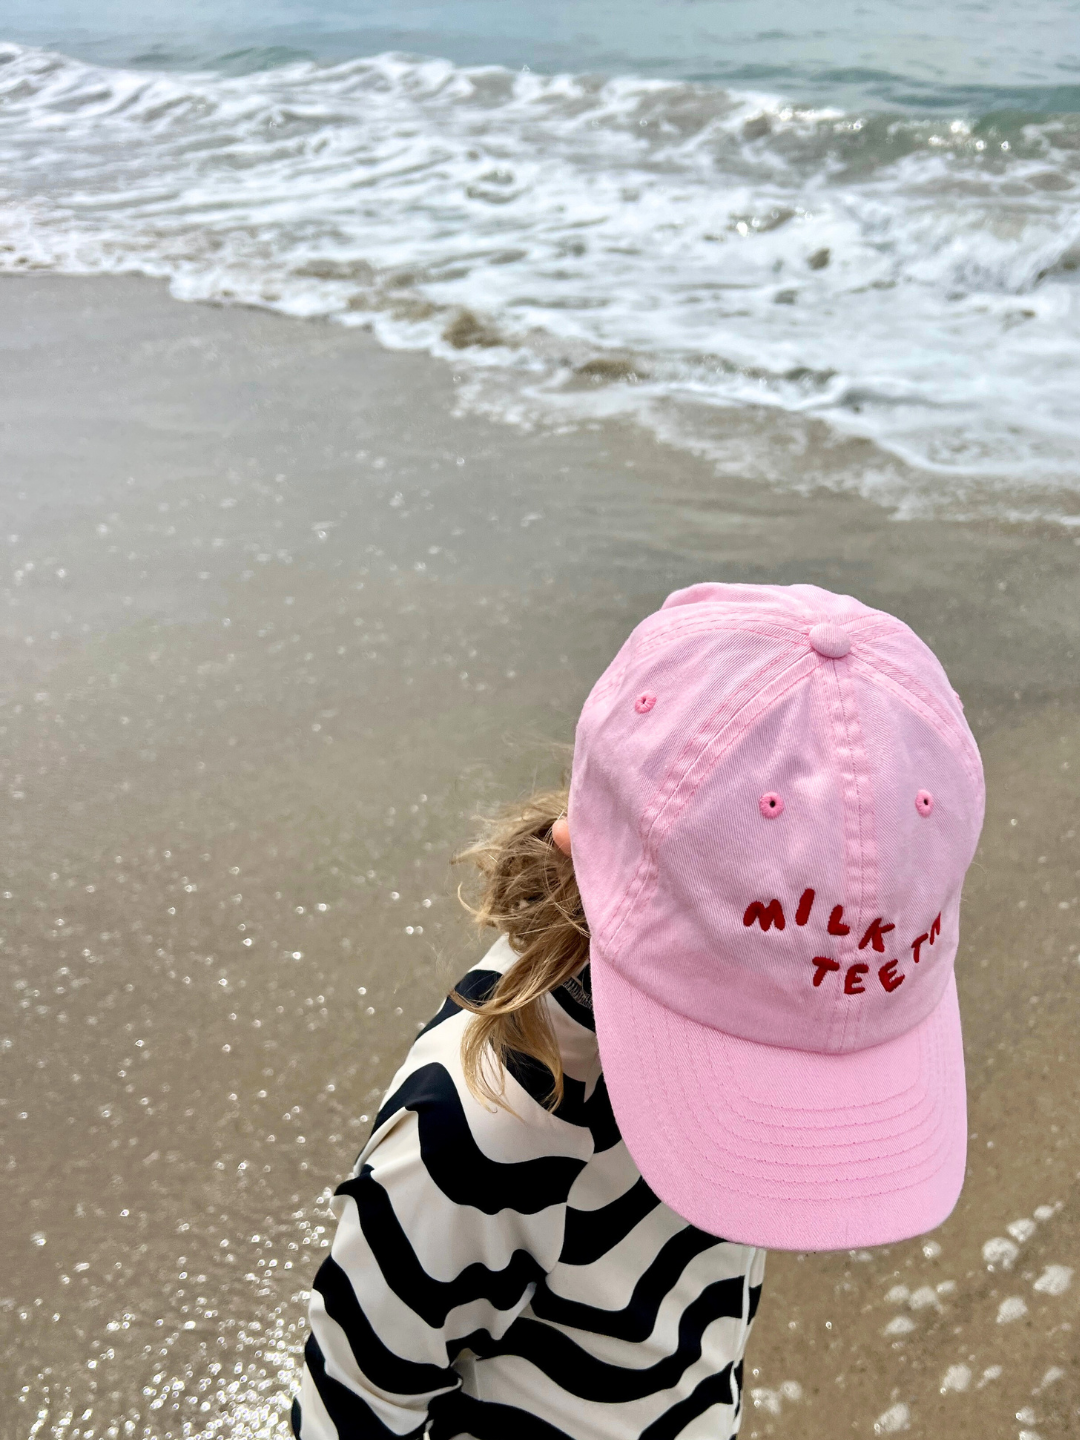 Pink | Child wearing the Milk Teeth baseball cap in bubblegum pink with red Milk Teeth lettering, at the beach in a black and white striped swimsuit.